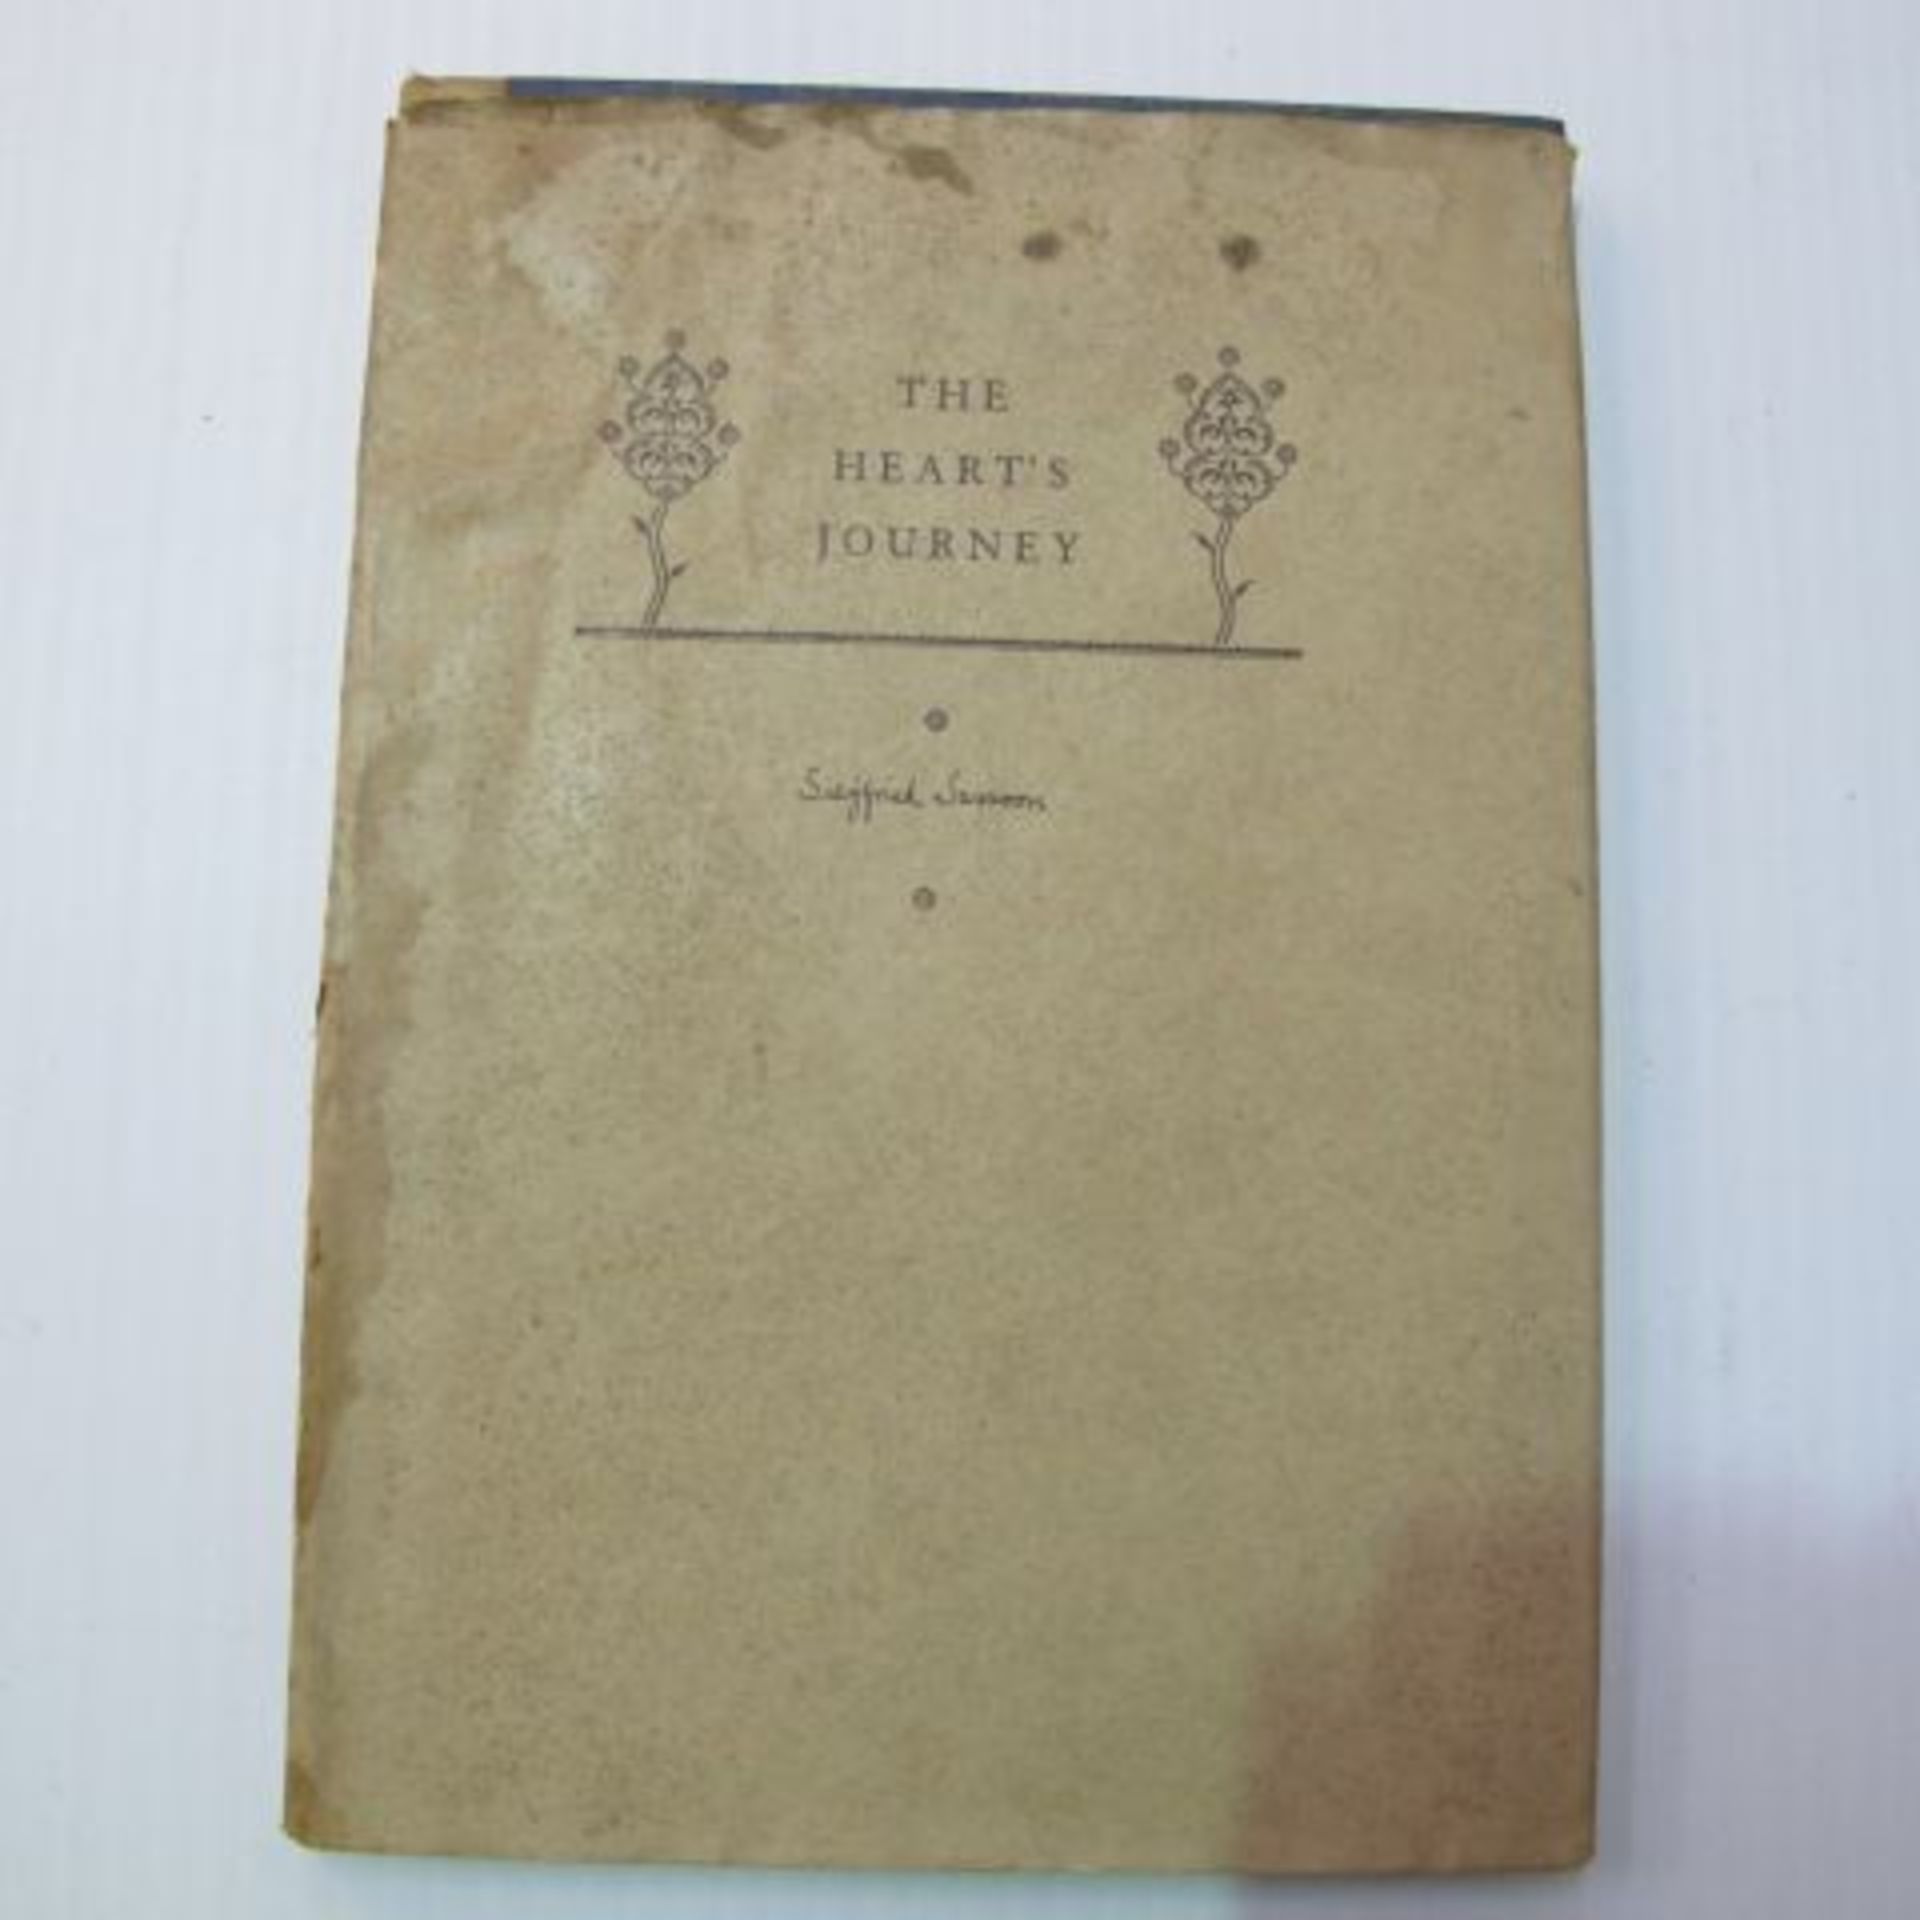 A hardback copy with dust cover of The Heart's Journey by Siegfried Sasson. The dust jacket